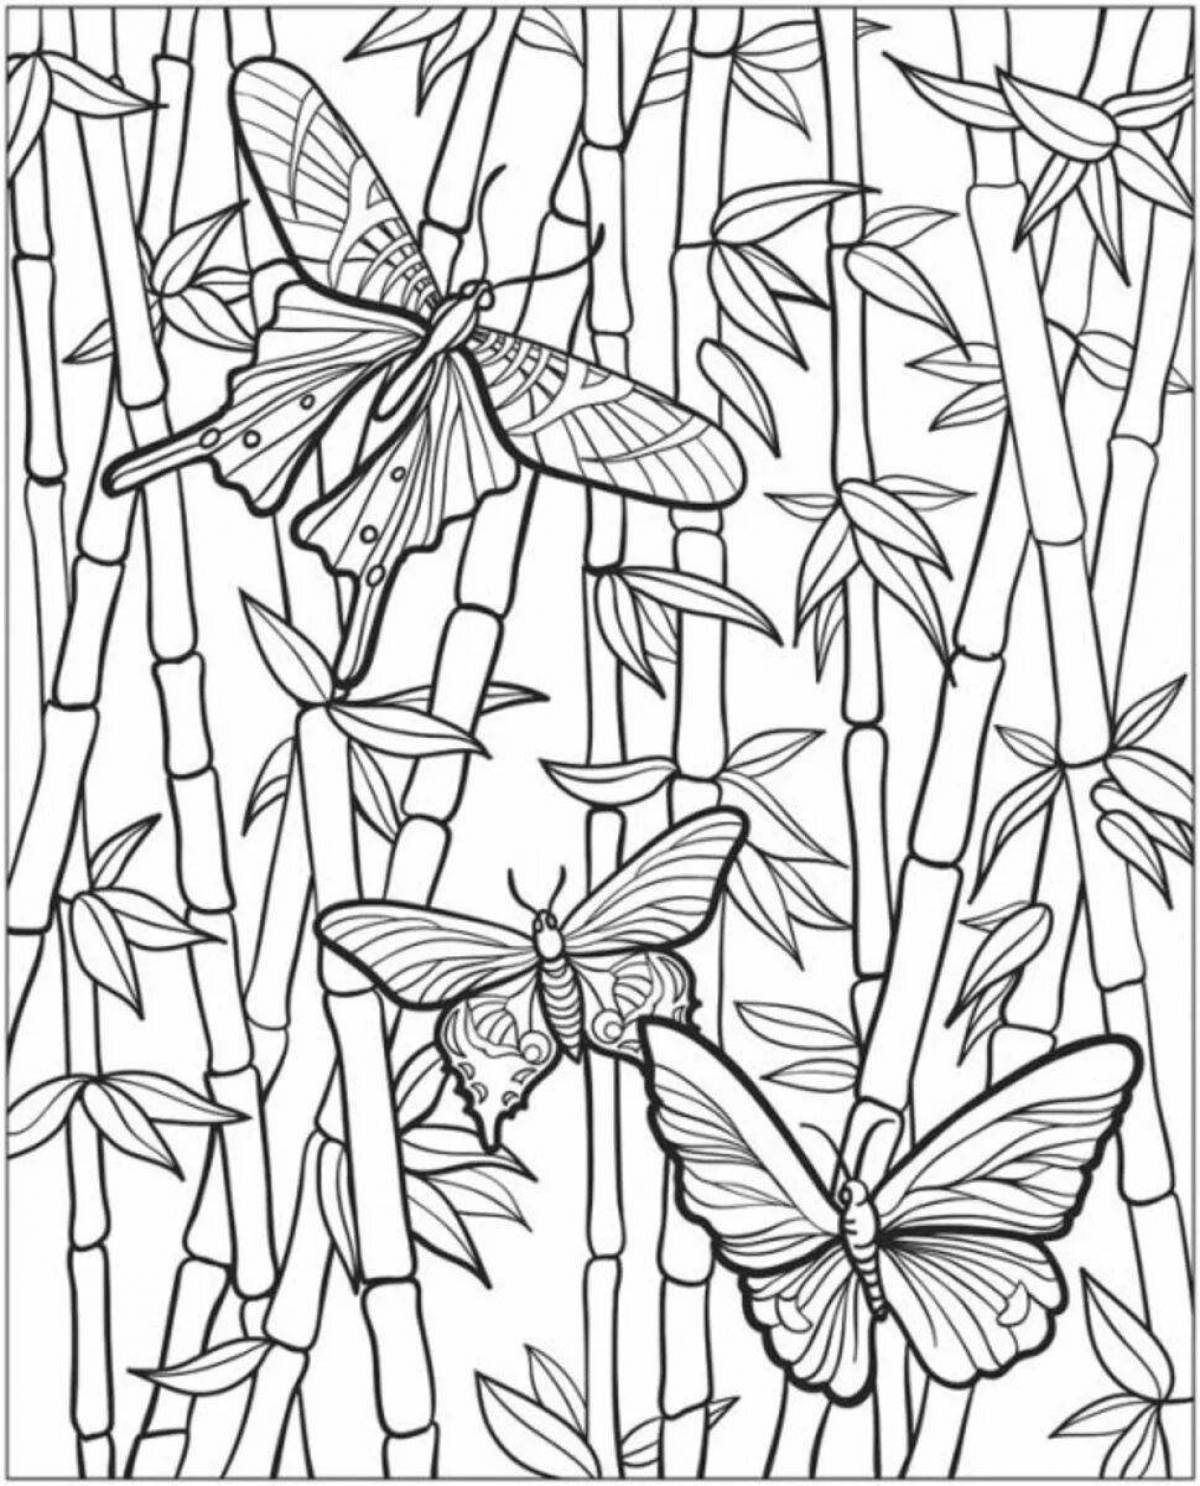 A strikingly colorful acrylic paint coloring page